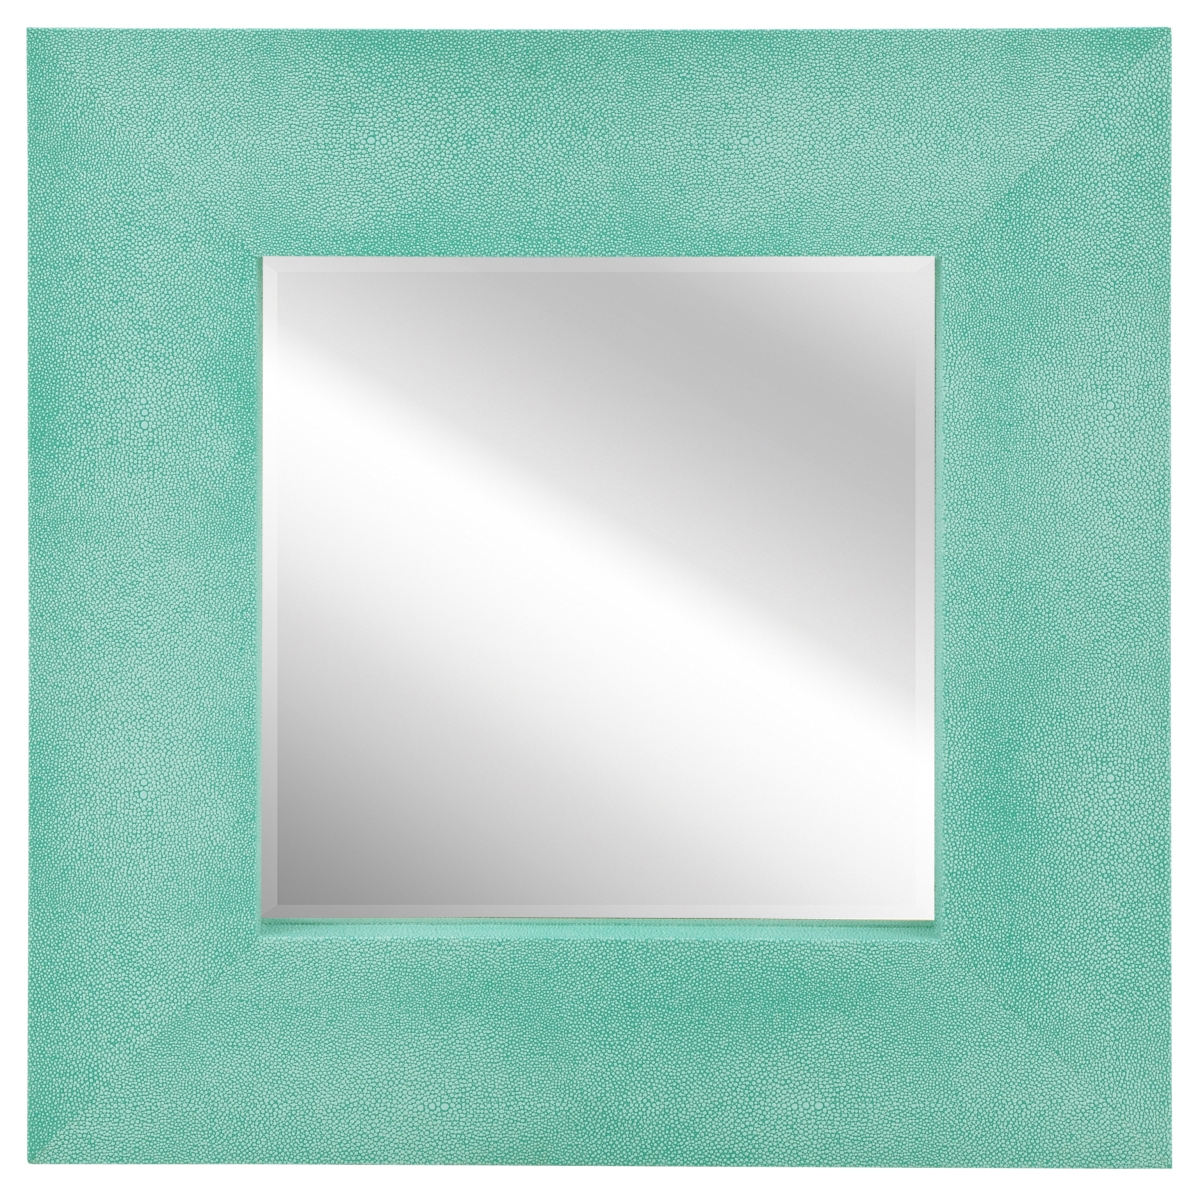 Elm-3030-01tl 30 X 30 In. Teal Metallic Shagreen Leather Framed Occasional Beveled Mirror